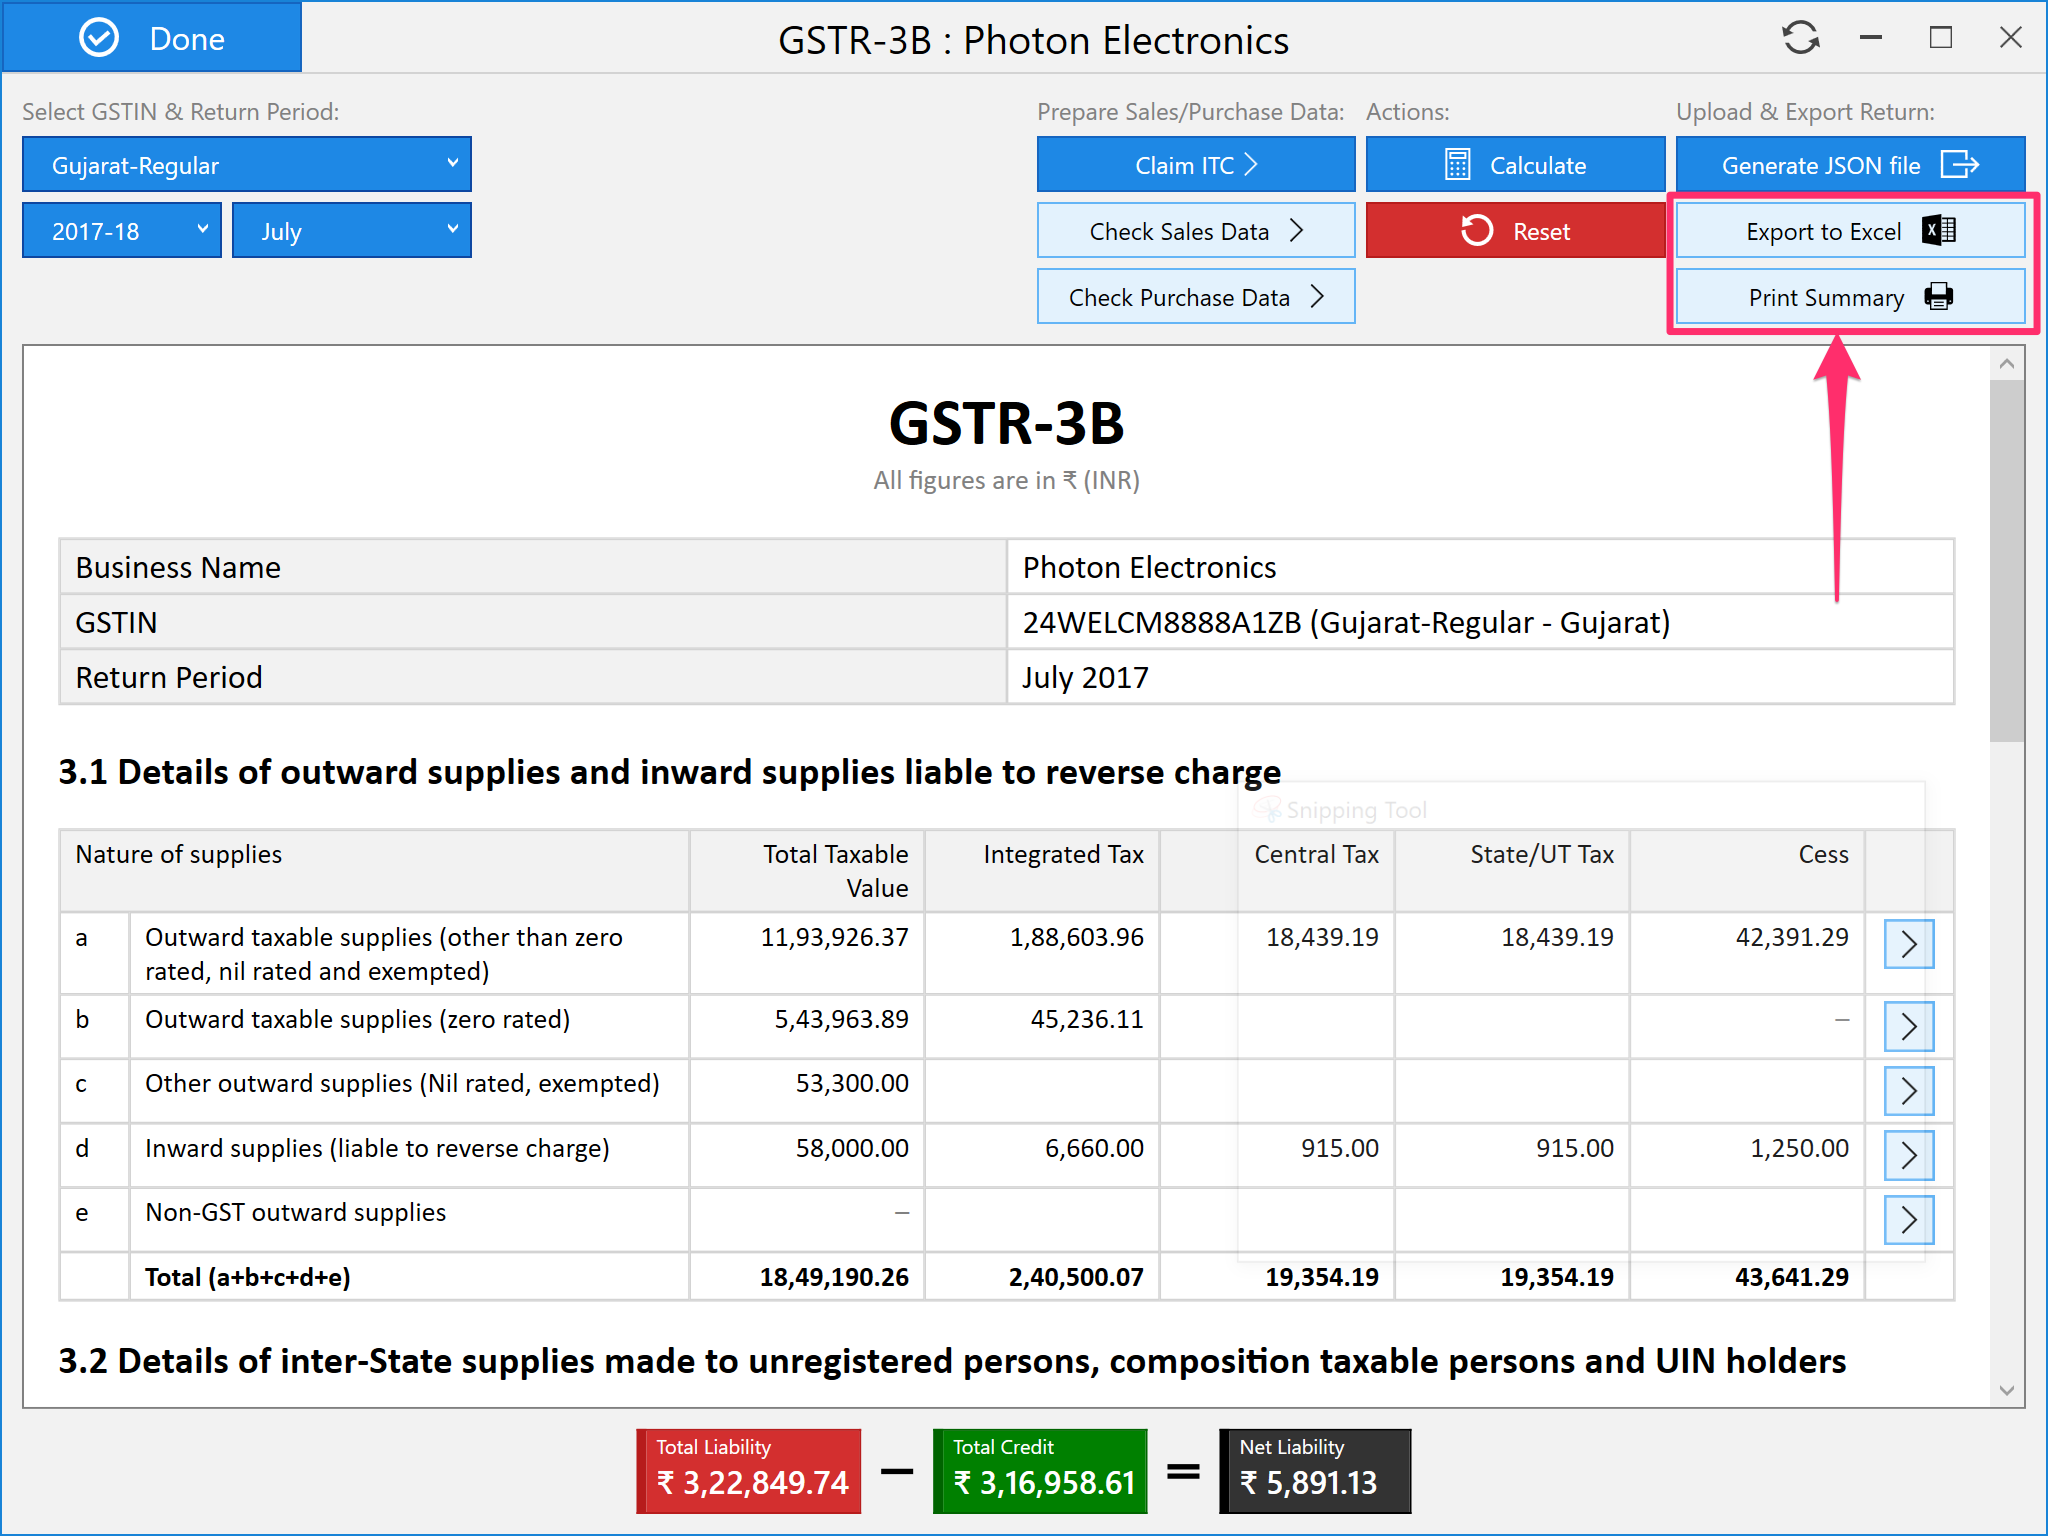 Export GSTR-3B to Excel